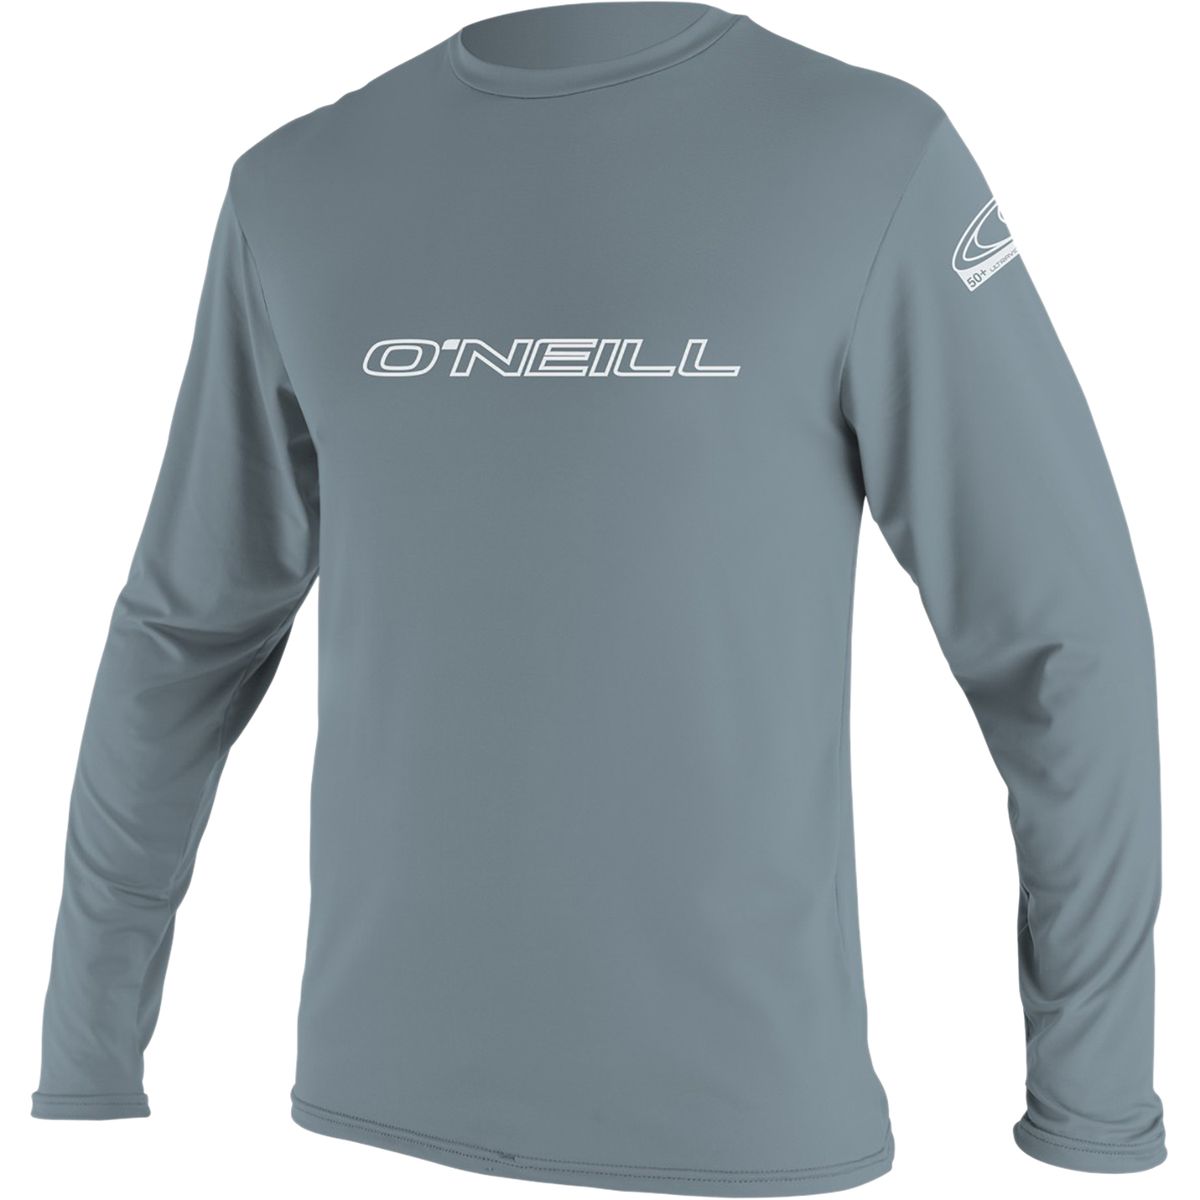 O'Neill Men's T-Shirts and short-sleeves, stylish comfort clothing